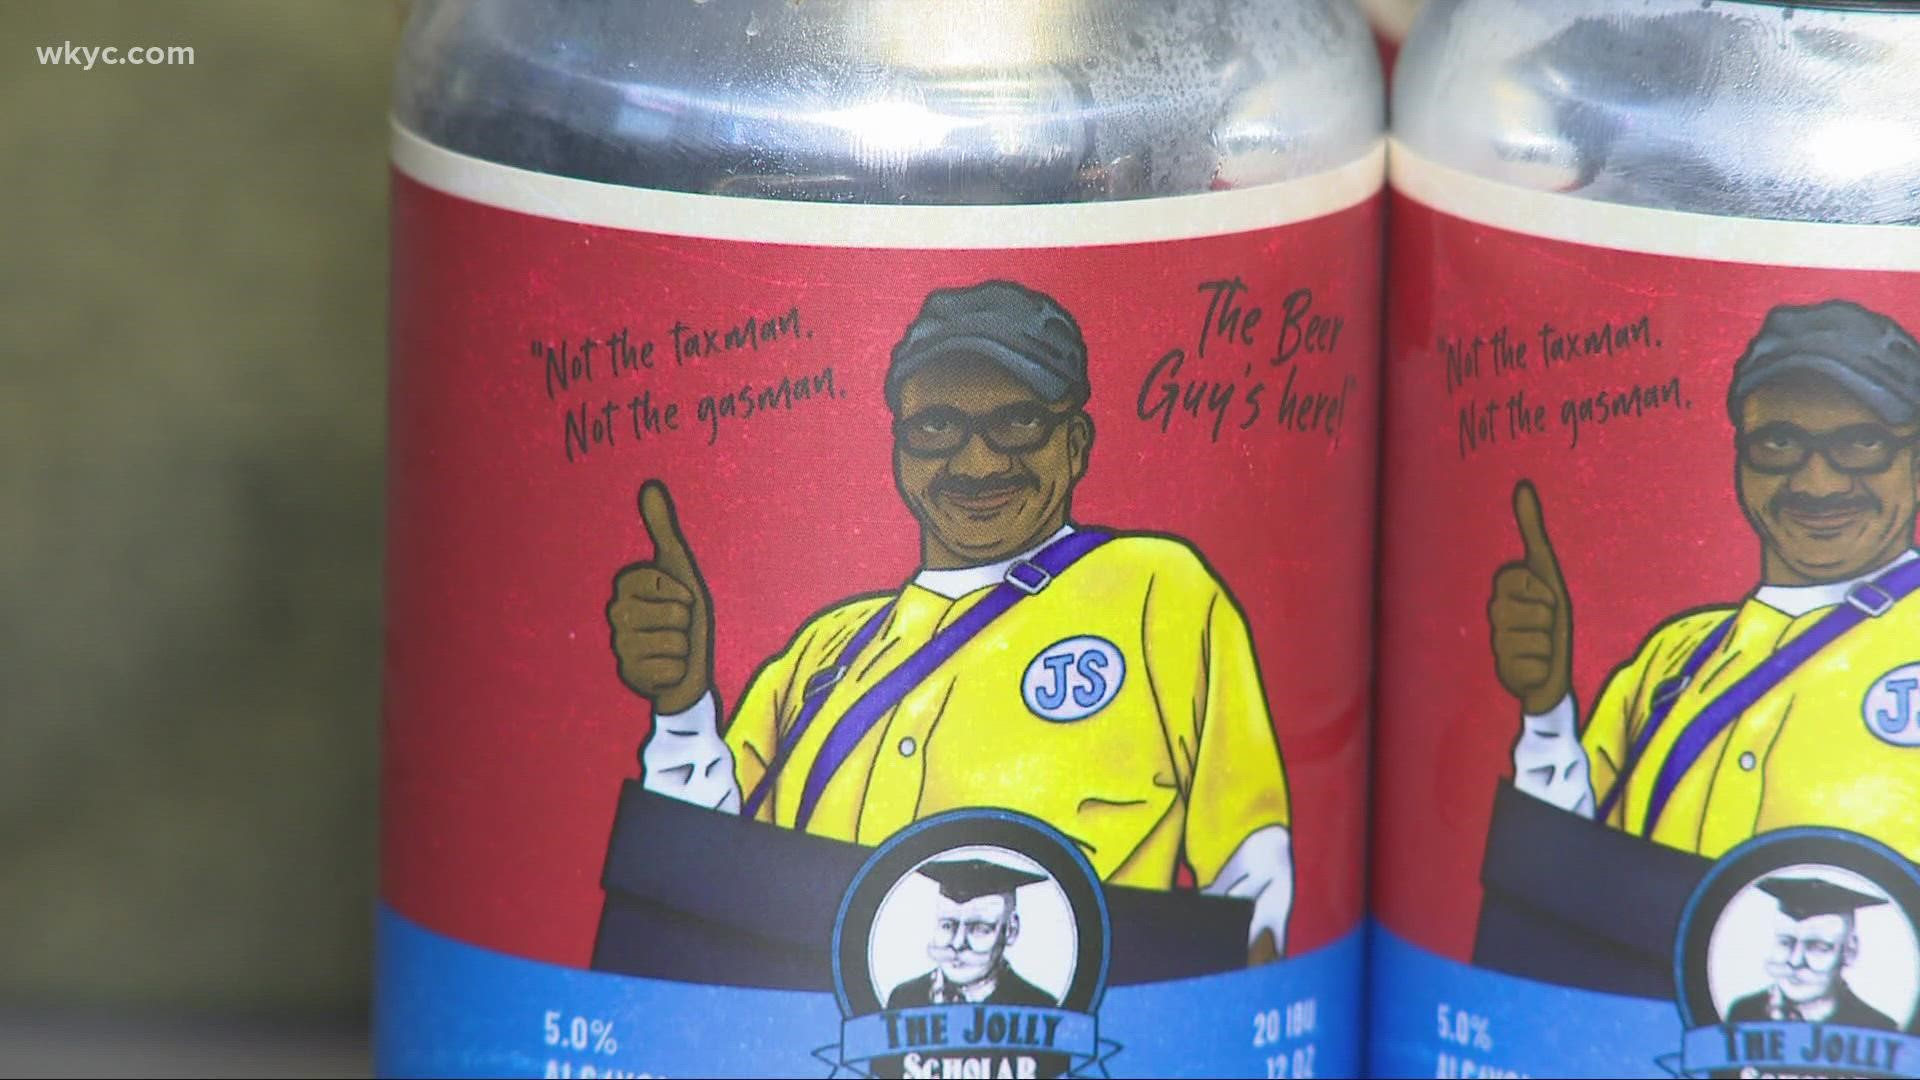 Since the beginning of the pandemic, Les Flake has been making beer deliveries door-to-door. "The Beer Guy" now has a beer named after him!